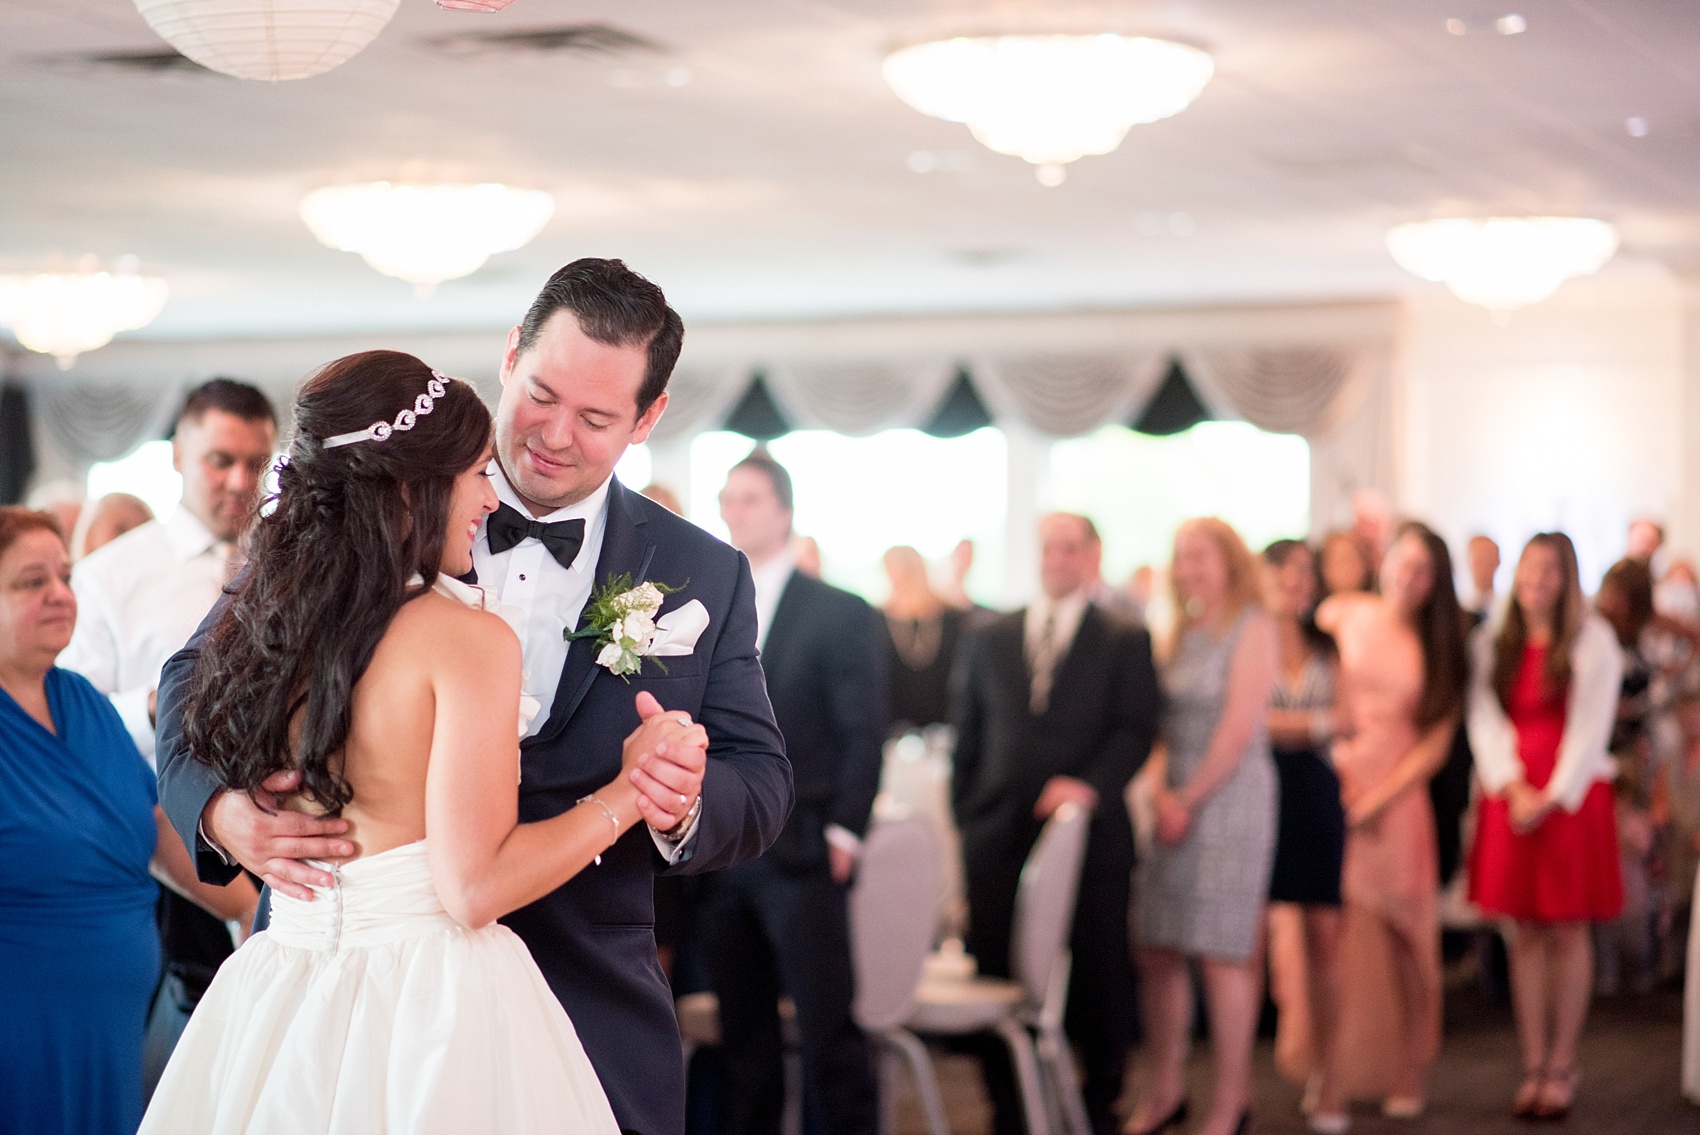 Mikkel Paige Photography photos from a wedding at Basking Ridge Country Club, NJ. A reception with blue, pink and white details. The bride and groom share a first dance.